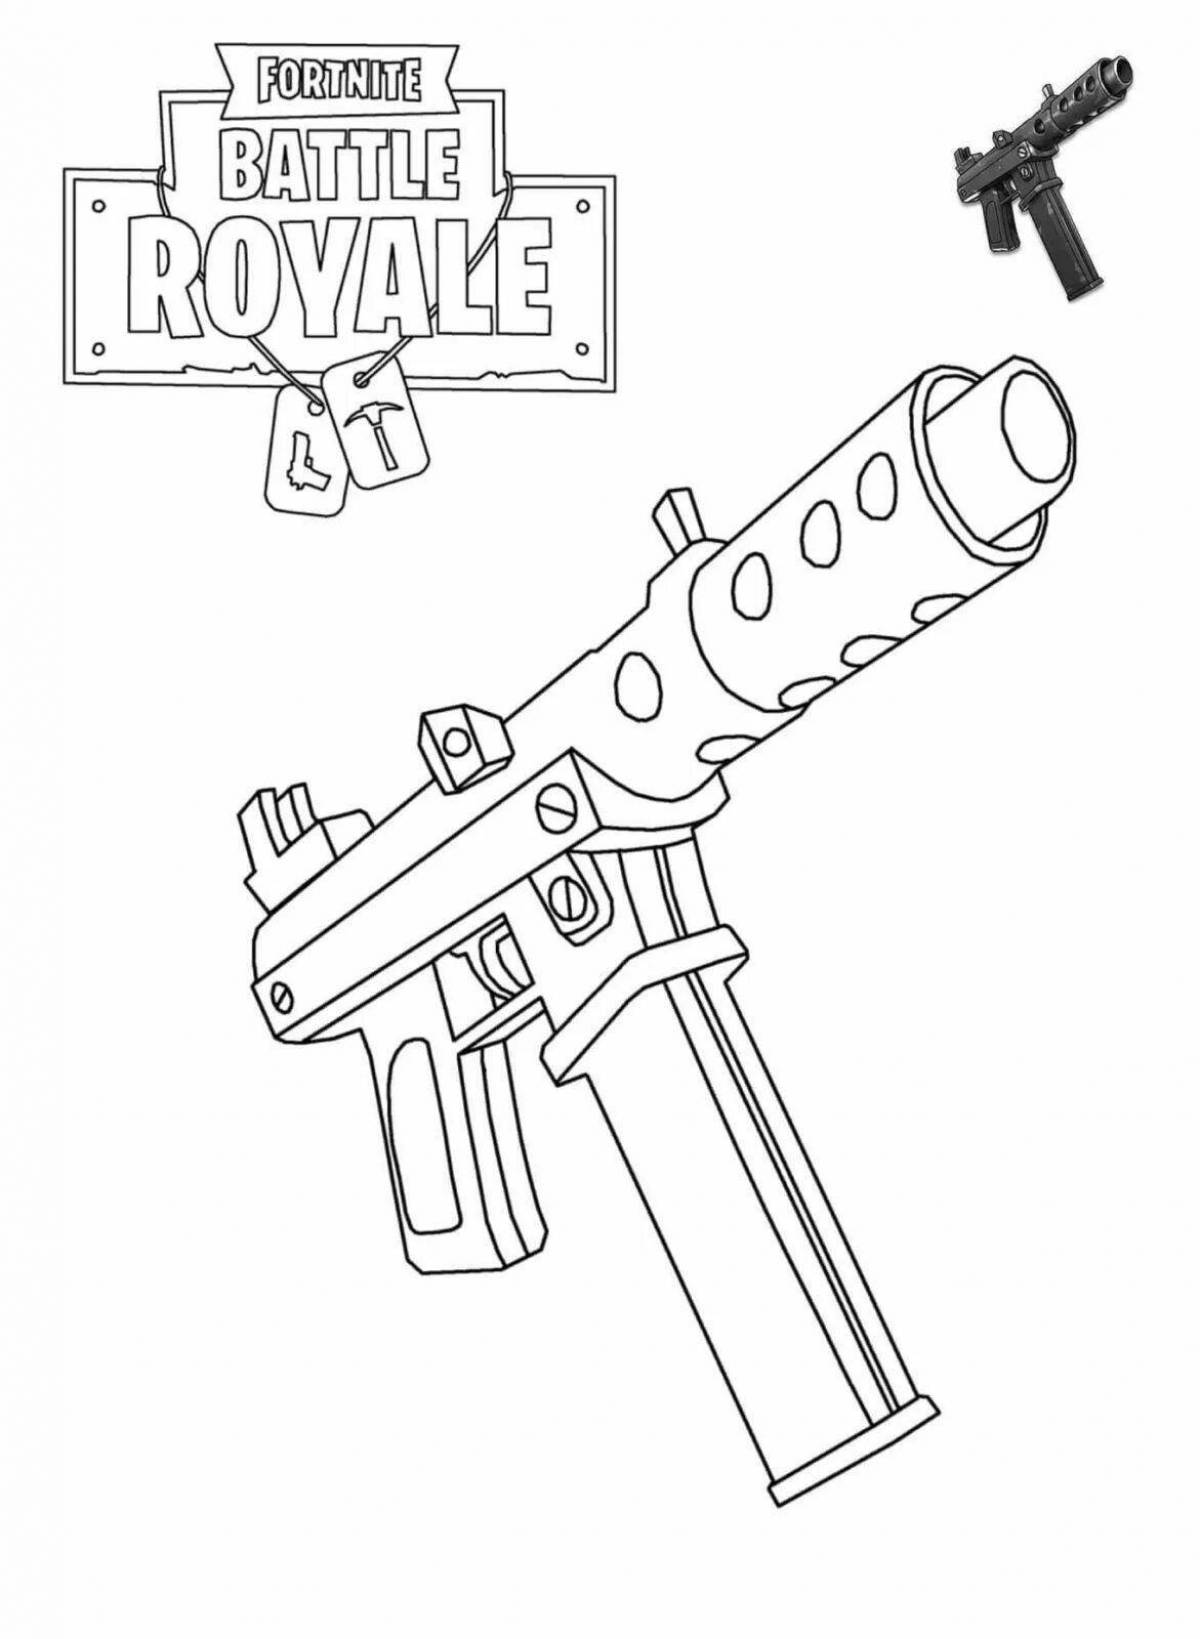 Fascinating standoff 2 logo coloring page